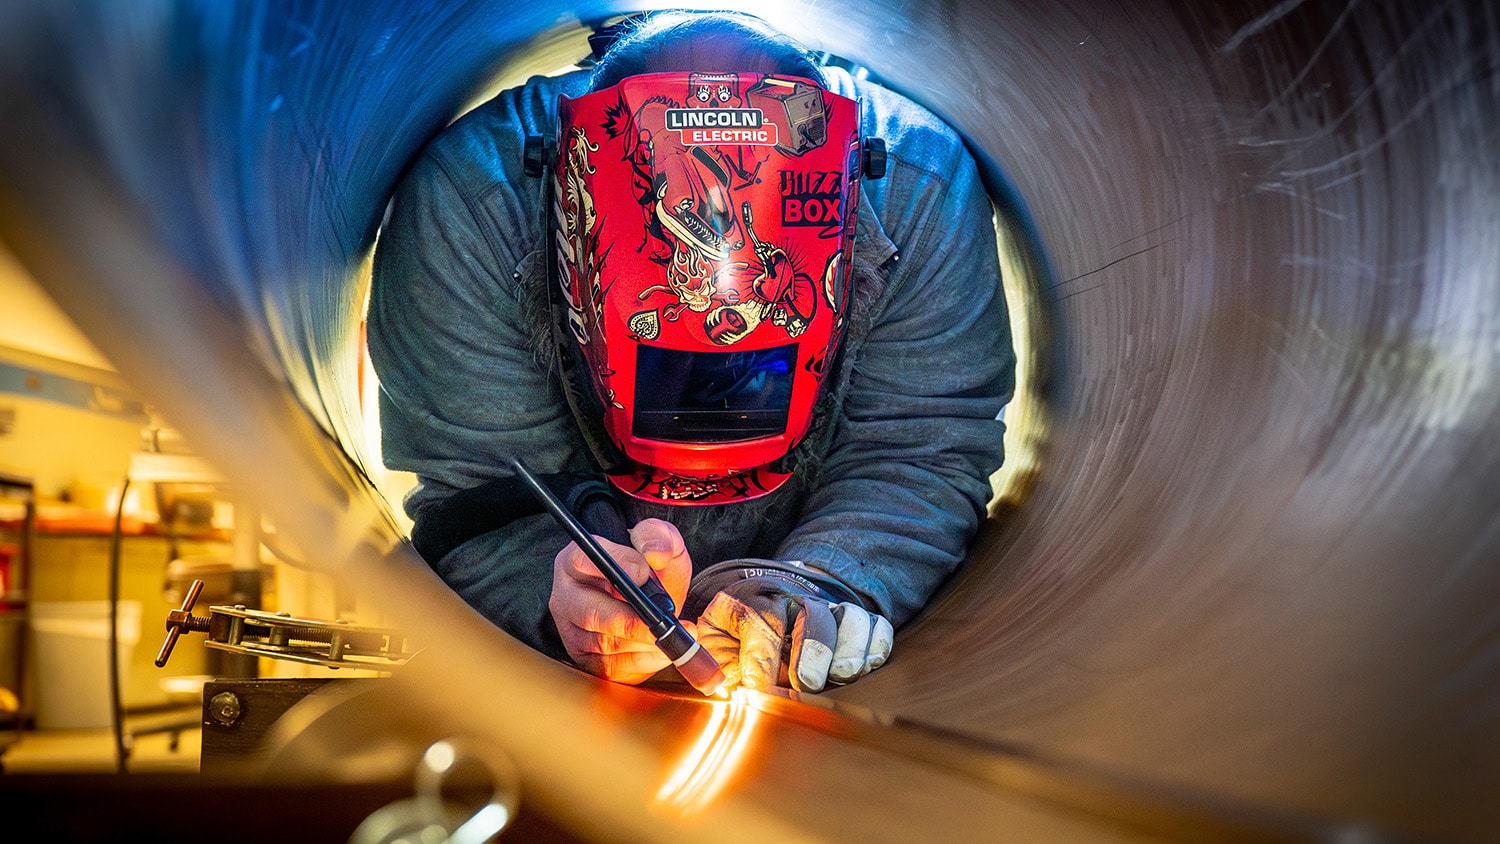 Machinist Chris Hewett welds on the roundhouse, a stainless steel cylindrical structure